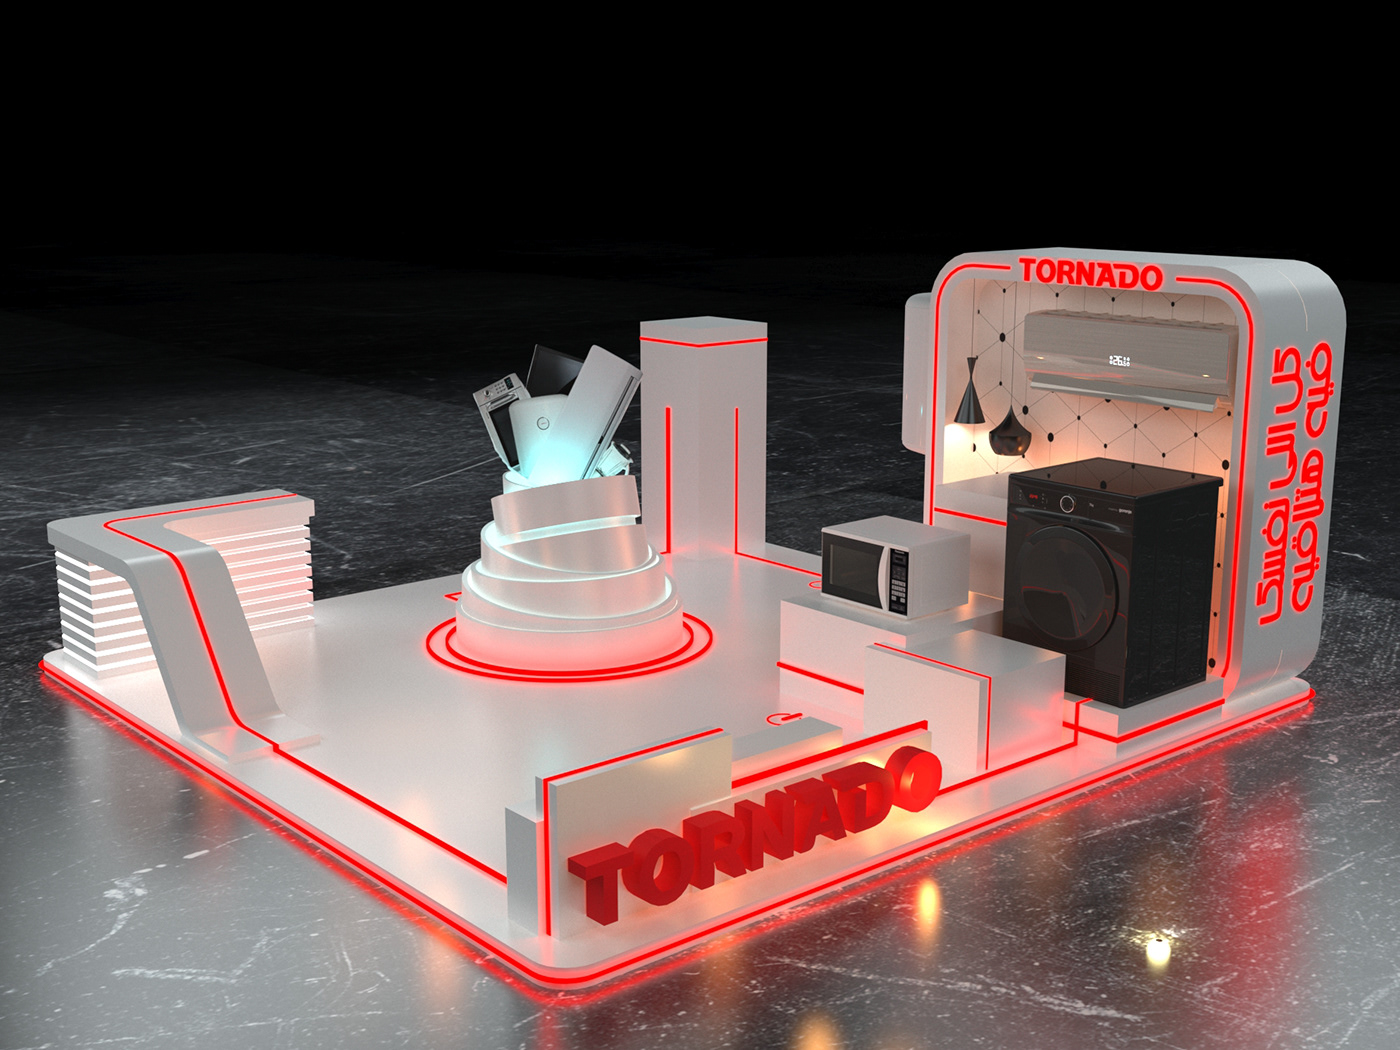 3DDesign activationbooth booth Display exhbo Kiosk Stand tornado